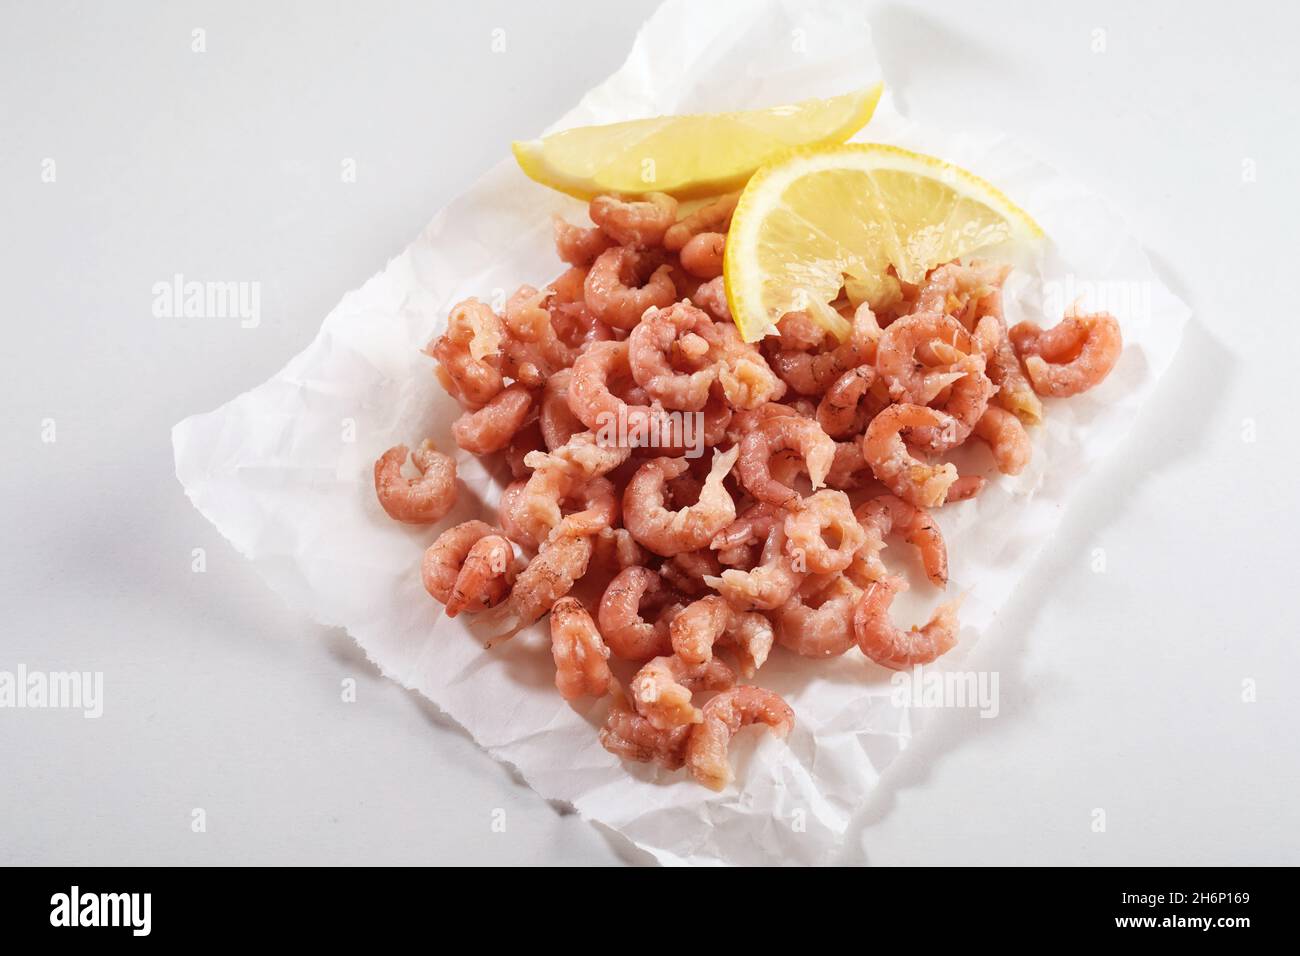 From above of heap of cooked peeled Krabben with slices of fresh lemon on baking paper on white background Stock Photo